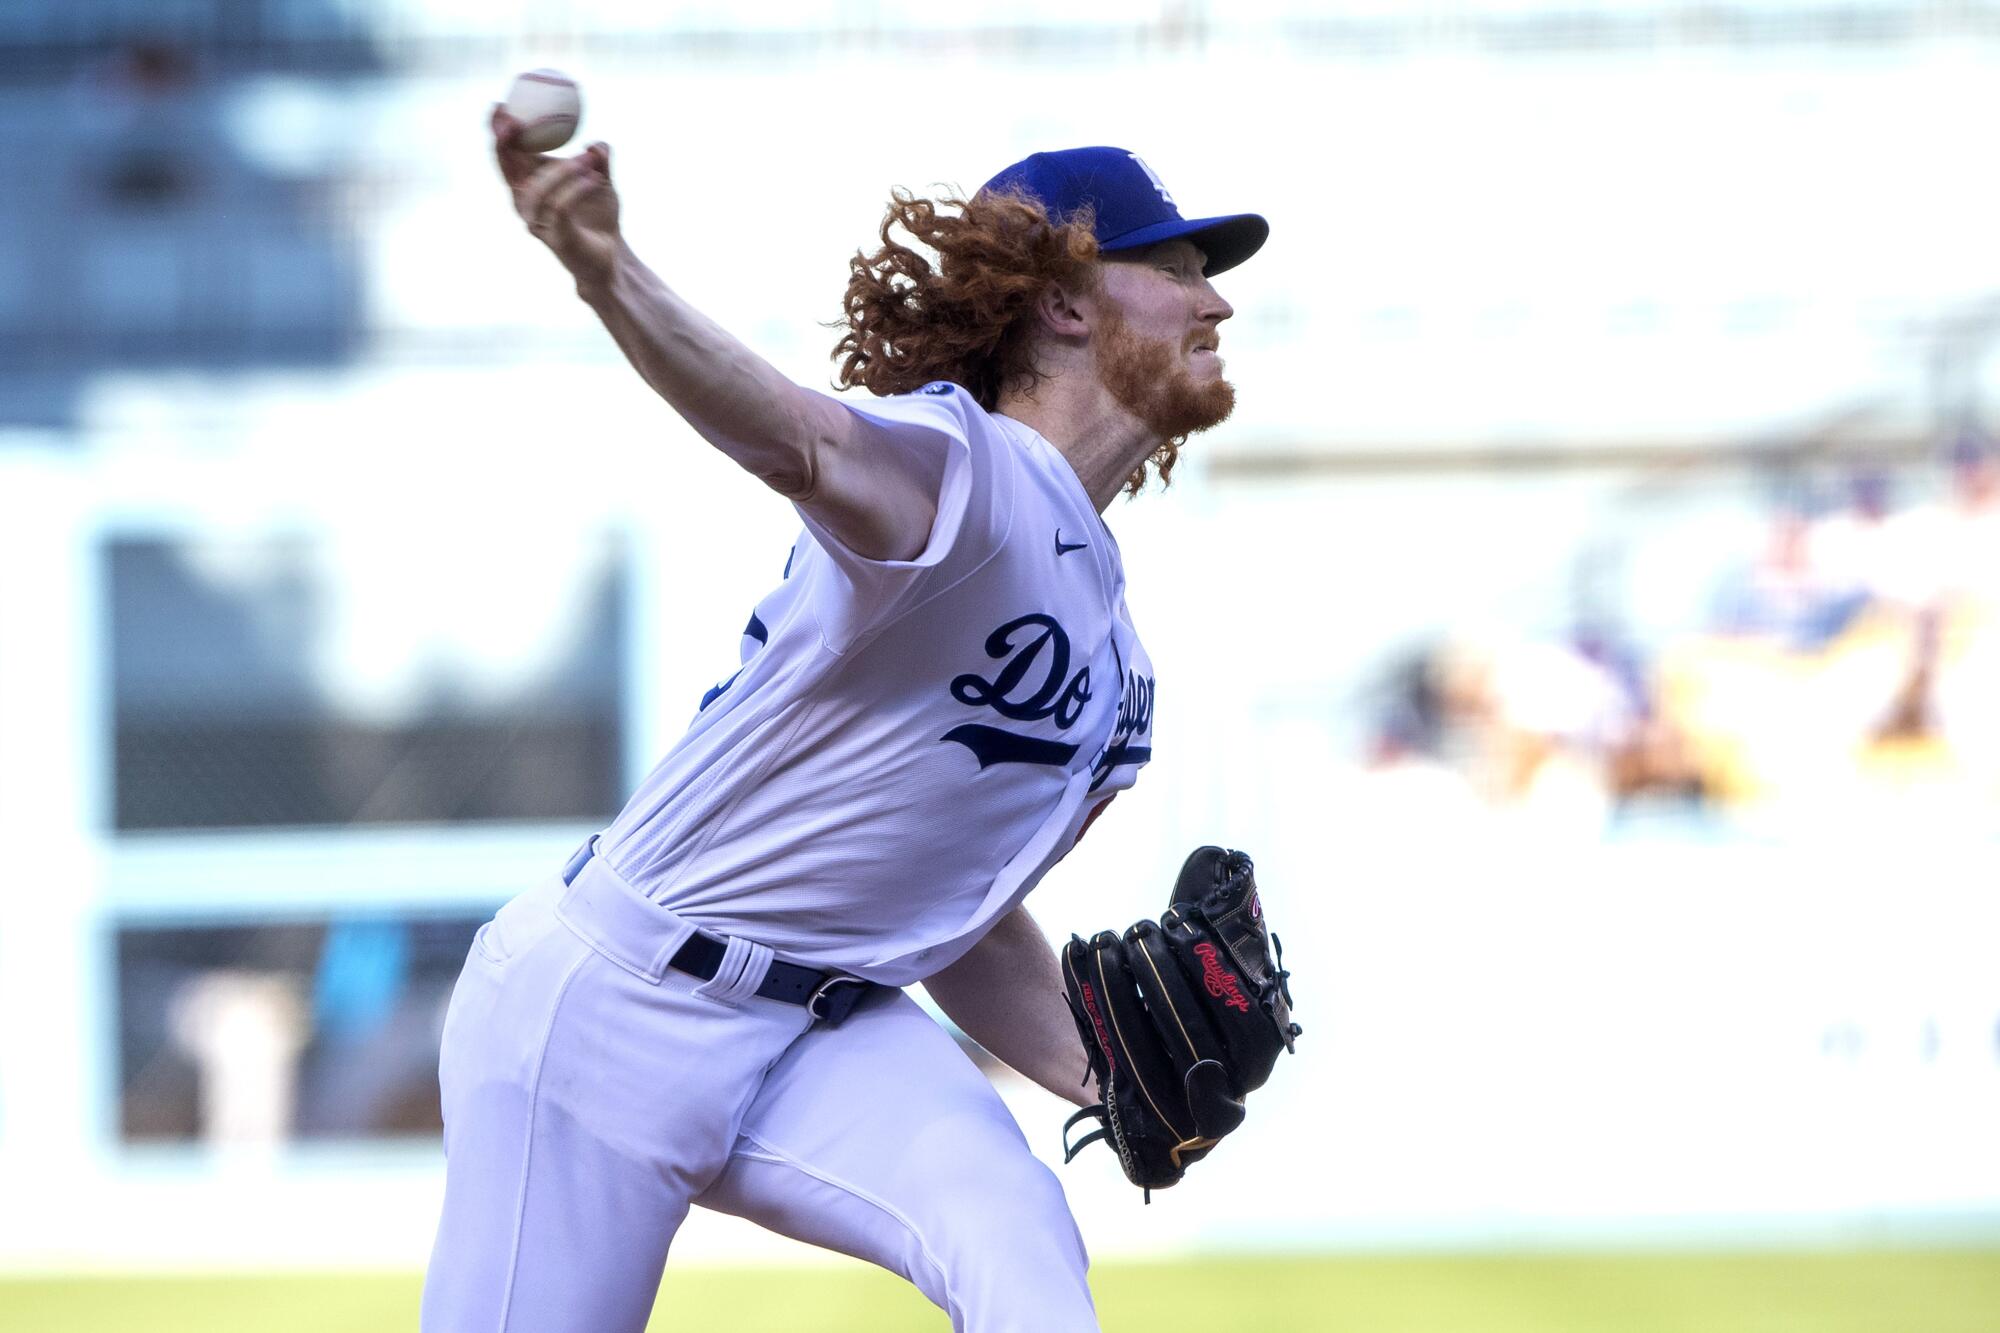 Dodgers starting pitcher Dustin May delivers against the Miami Marlins on Saturday.